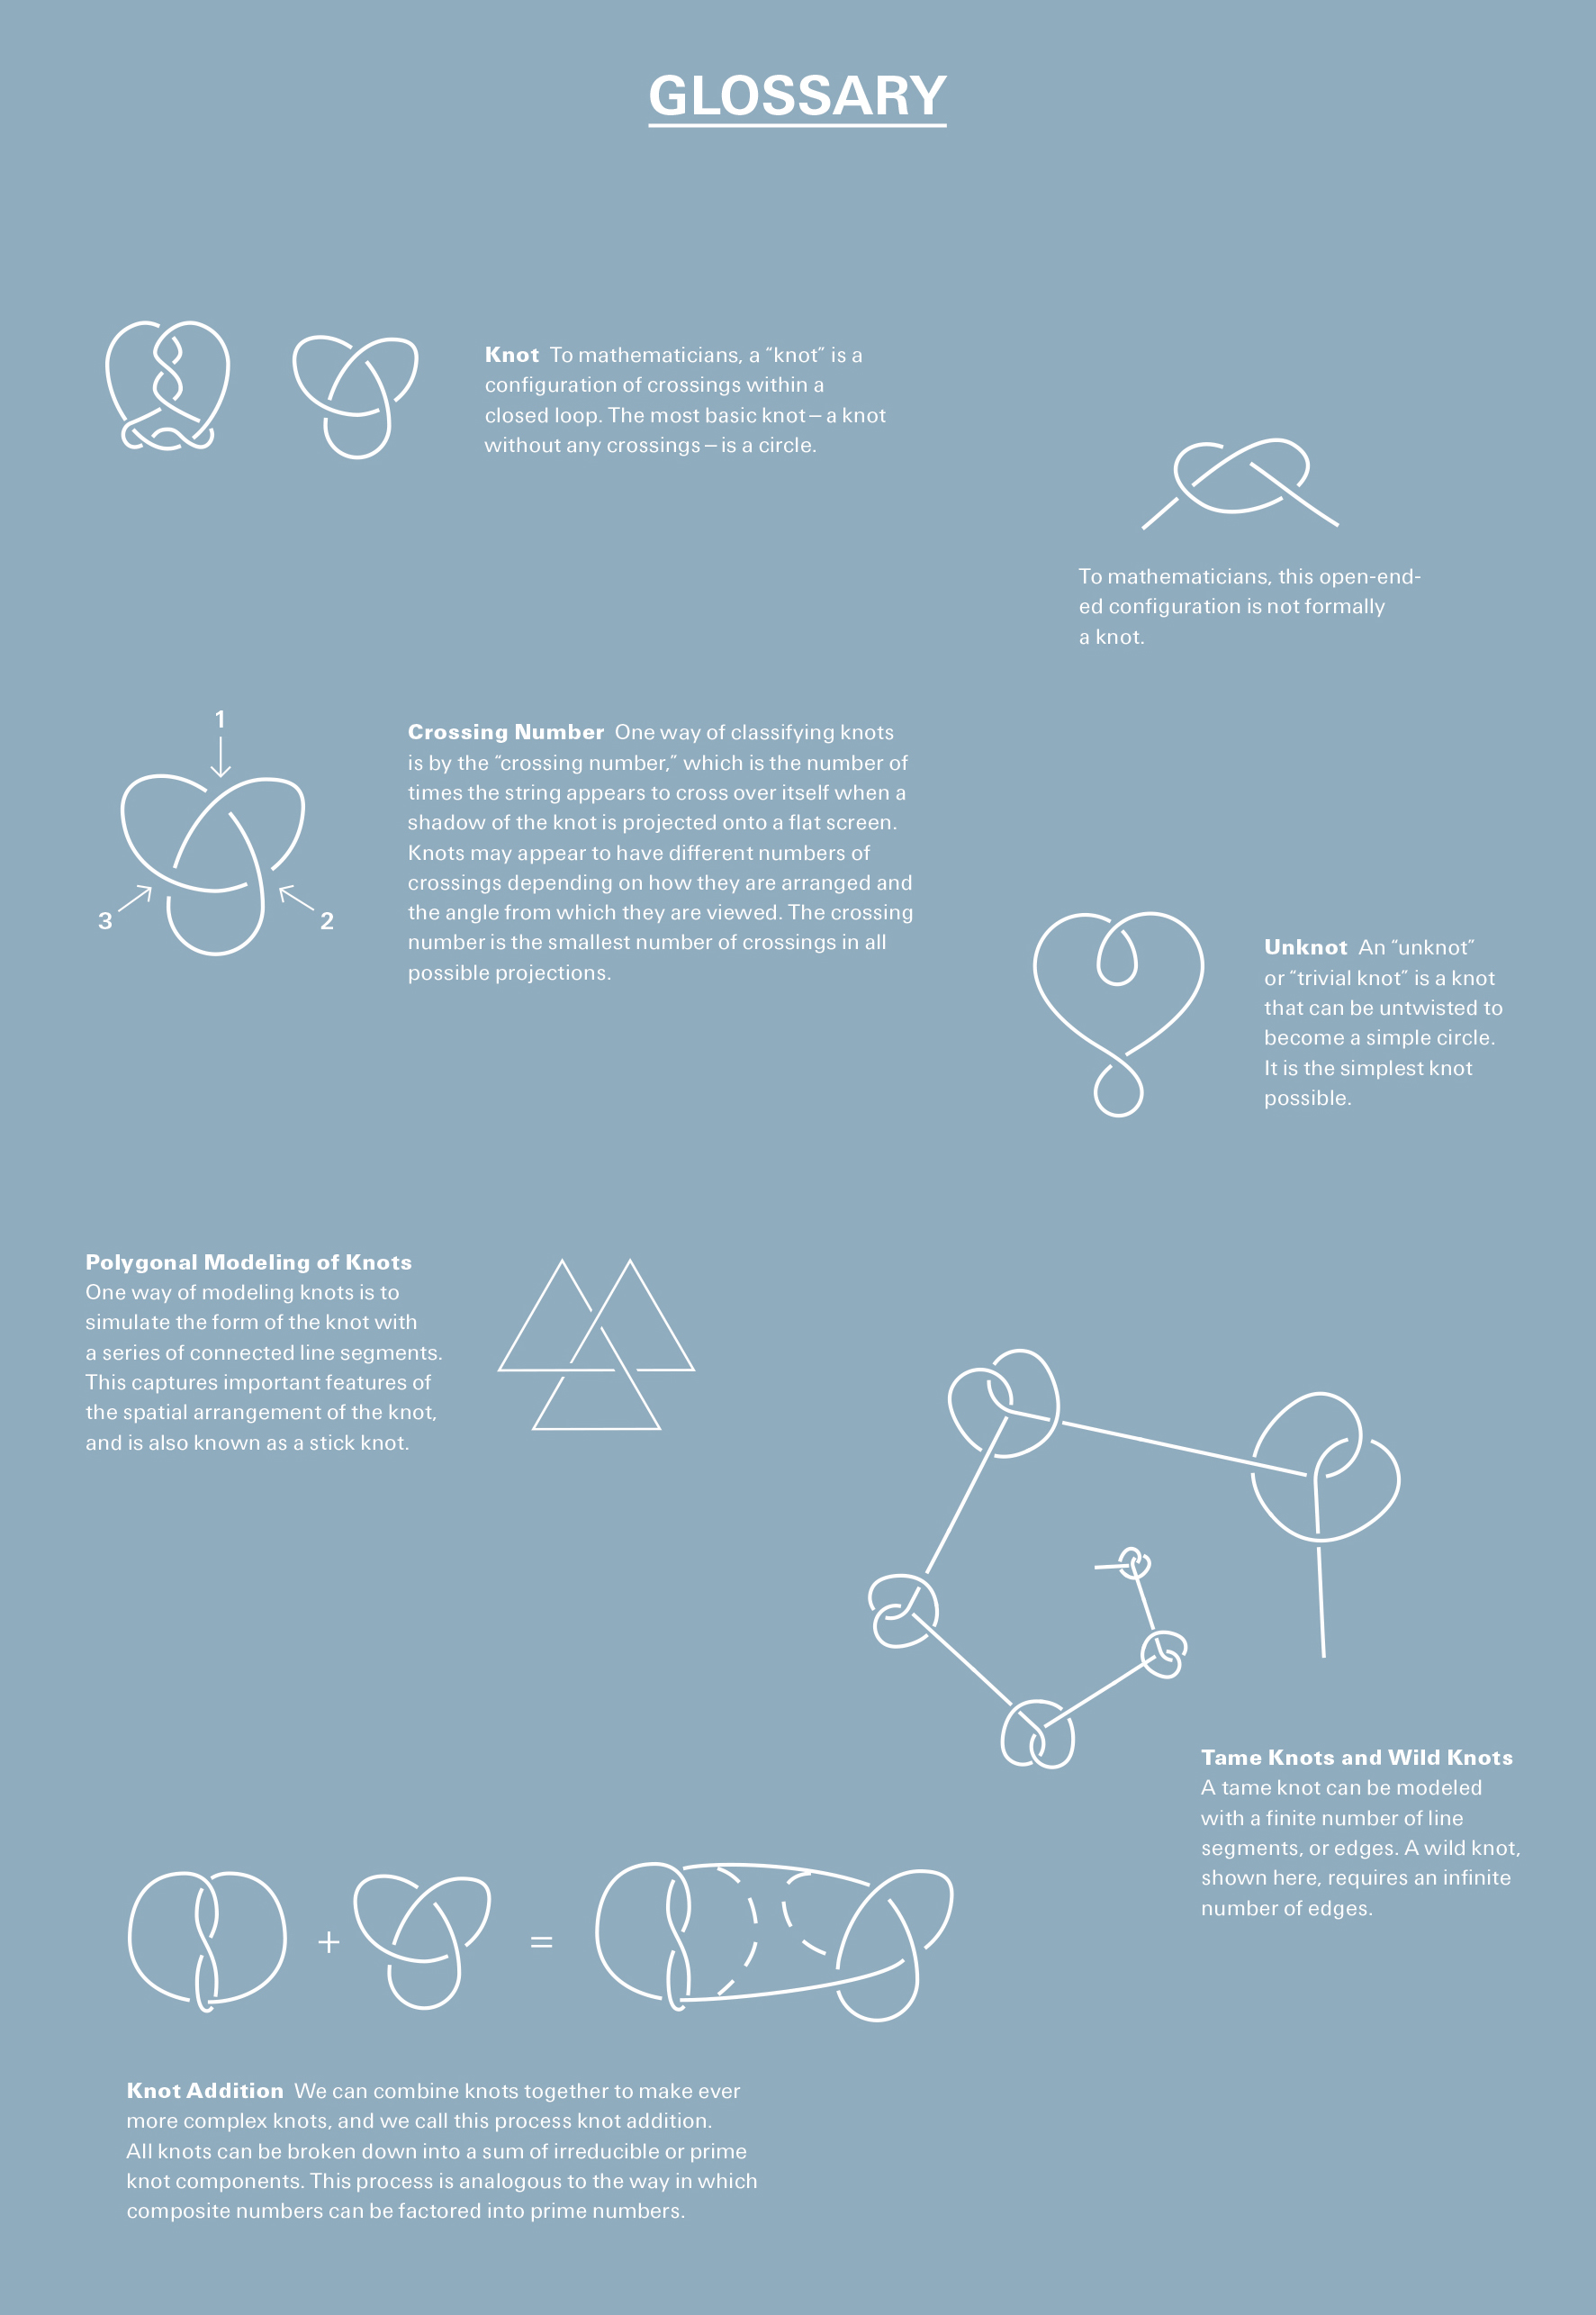 An illustrated glossary of terms in the mathematics of knots, including tame and wild knots, the crossing number, the unknot, knot addition, polygonal modeling of knots, and the very definition of knot, a configuration of crossings within a closed loop.